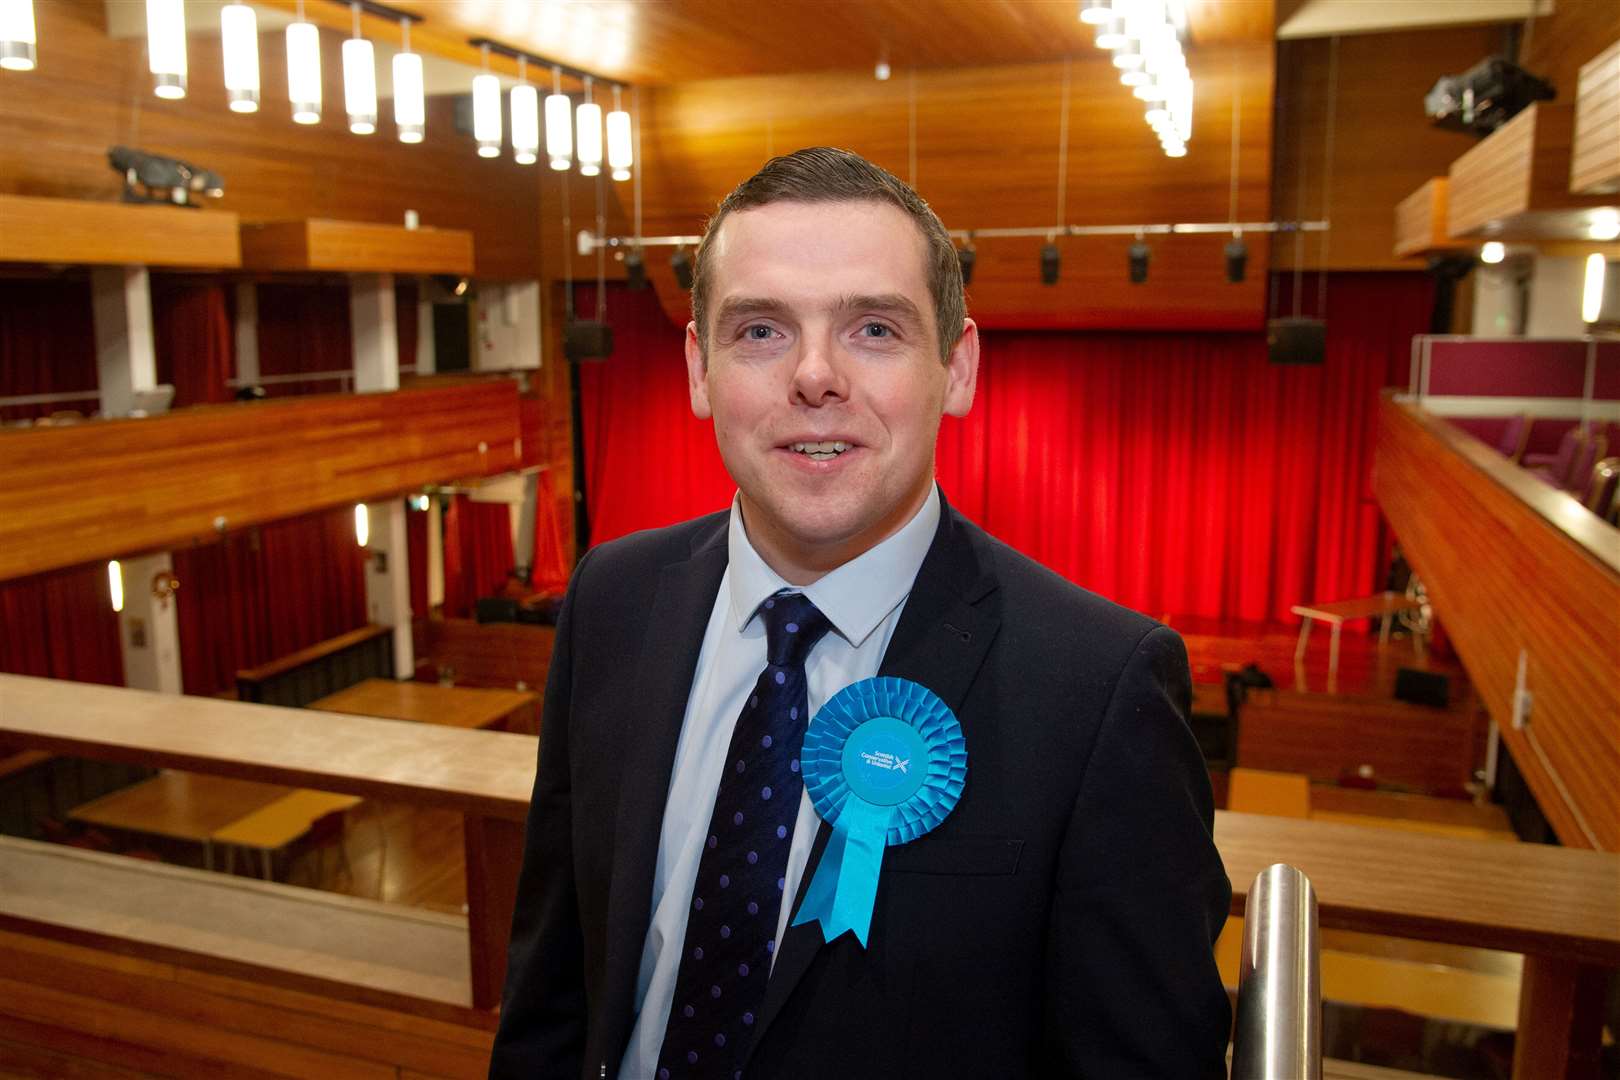 Douglas Ross said the way Dominic Cummings chose to interpret government lockdown advice 'was not shared by the vast majority of people who have done as the government asked'. Picture: Daniel Forsyth